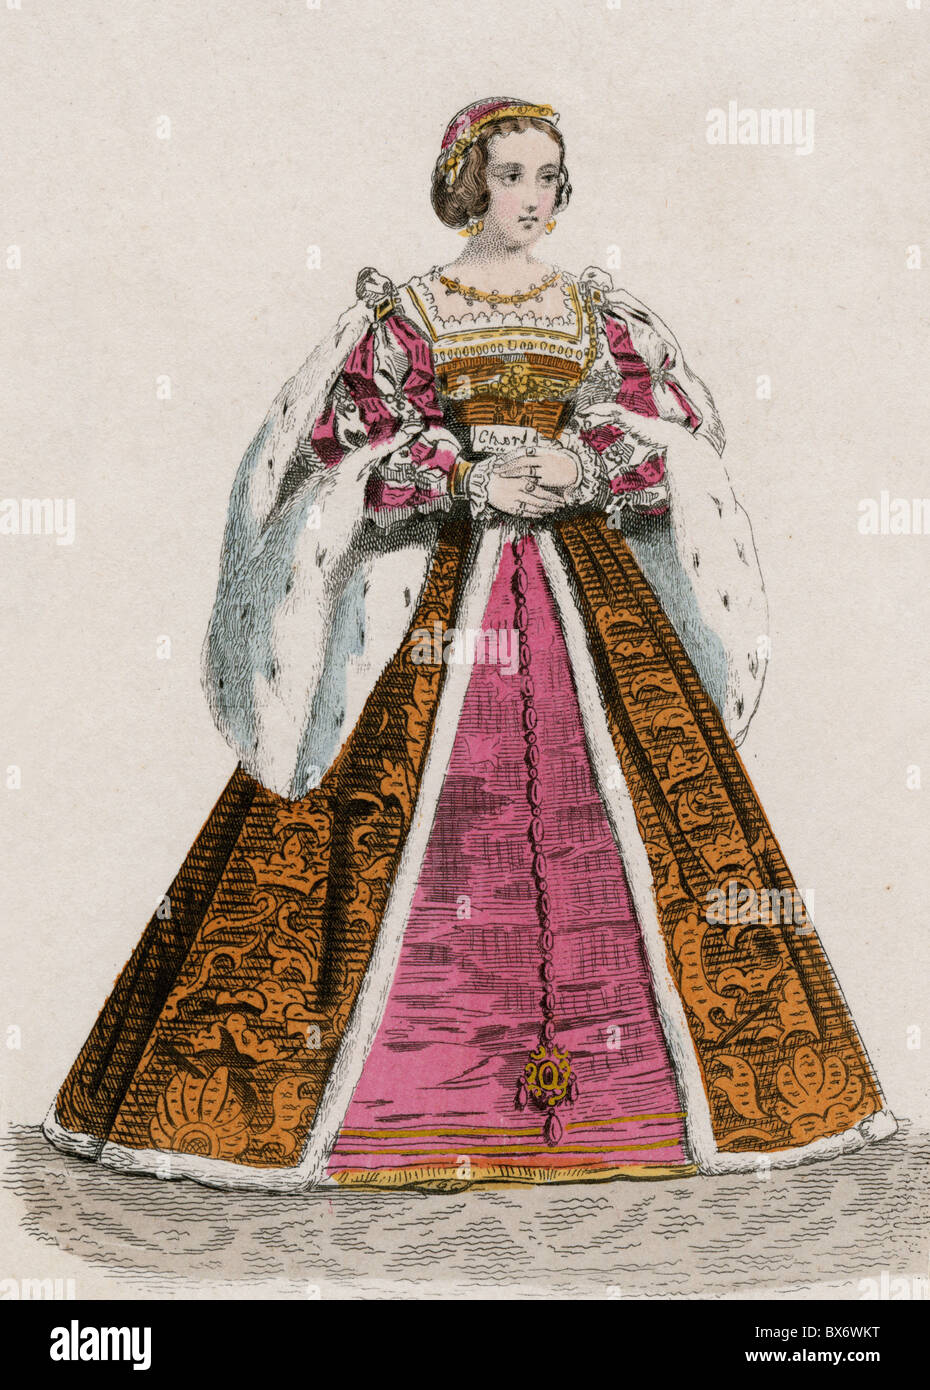 Eleanor, 15.11.1498 - 18.2.1558, Queen Consort of France 4.7.1530 - 31.3.1547, full length, coloured wood engraving, 19th century, Stock Photo